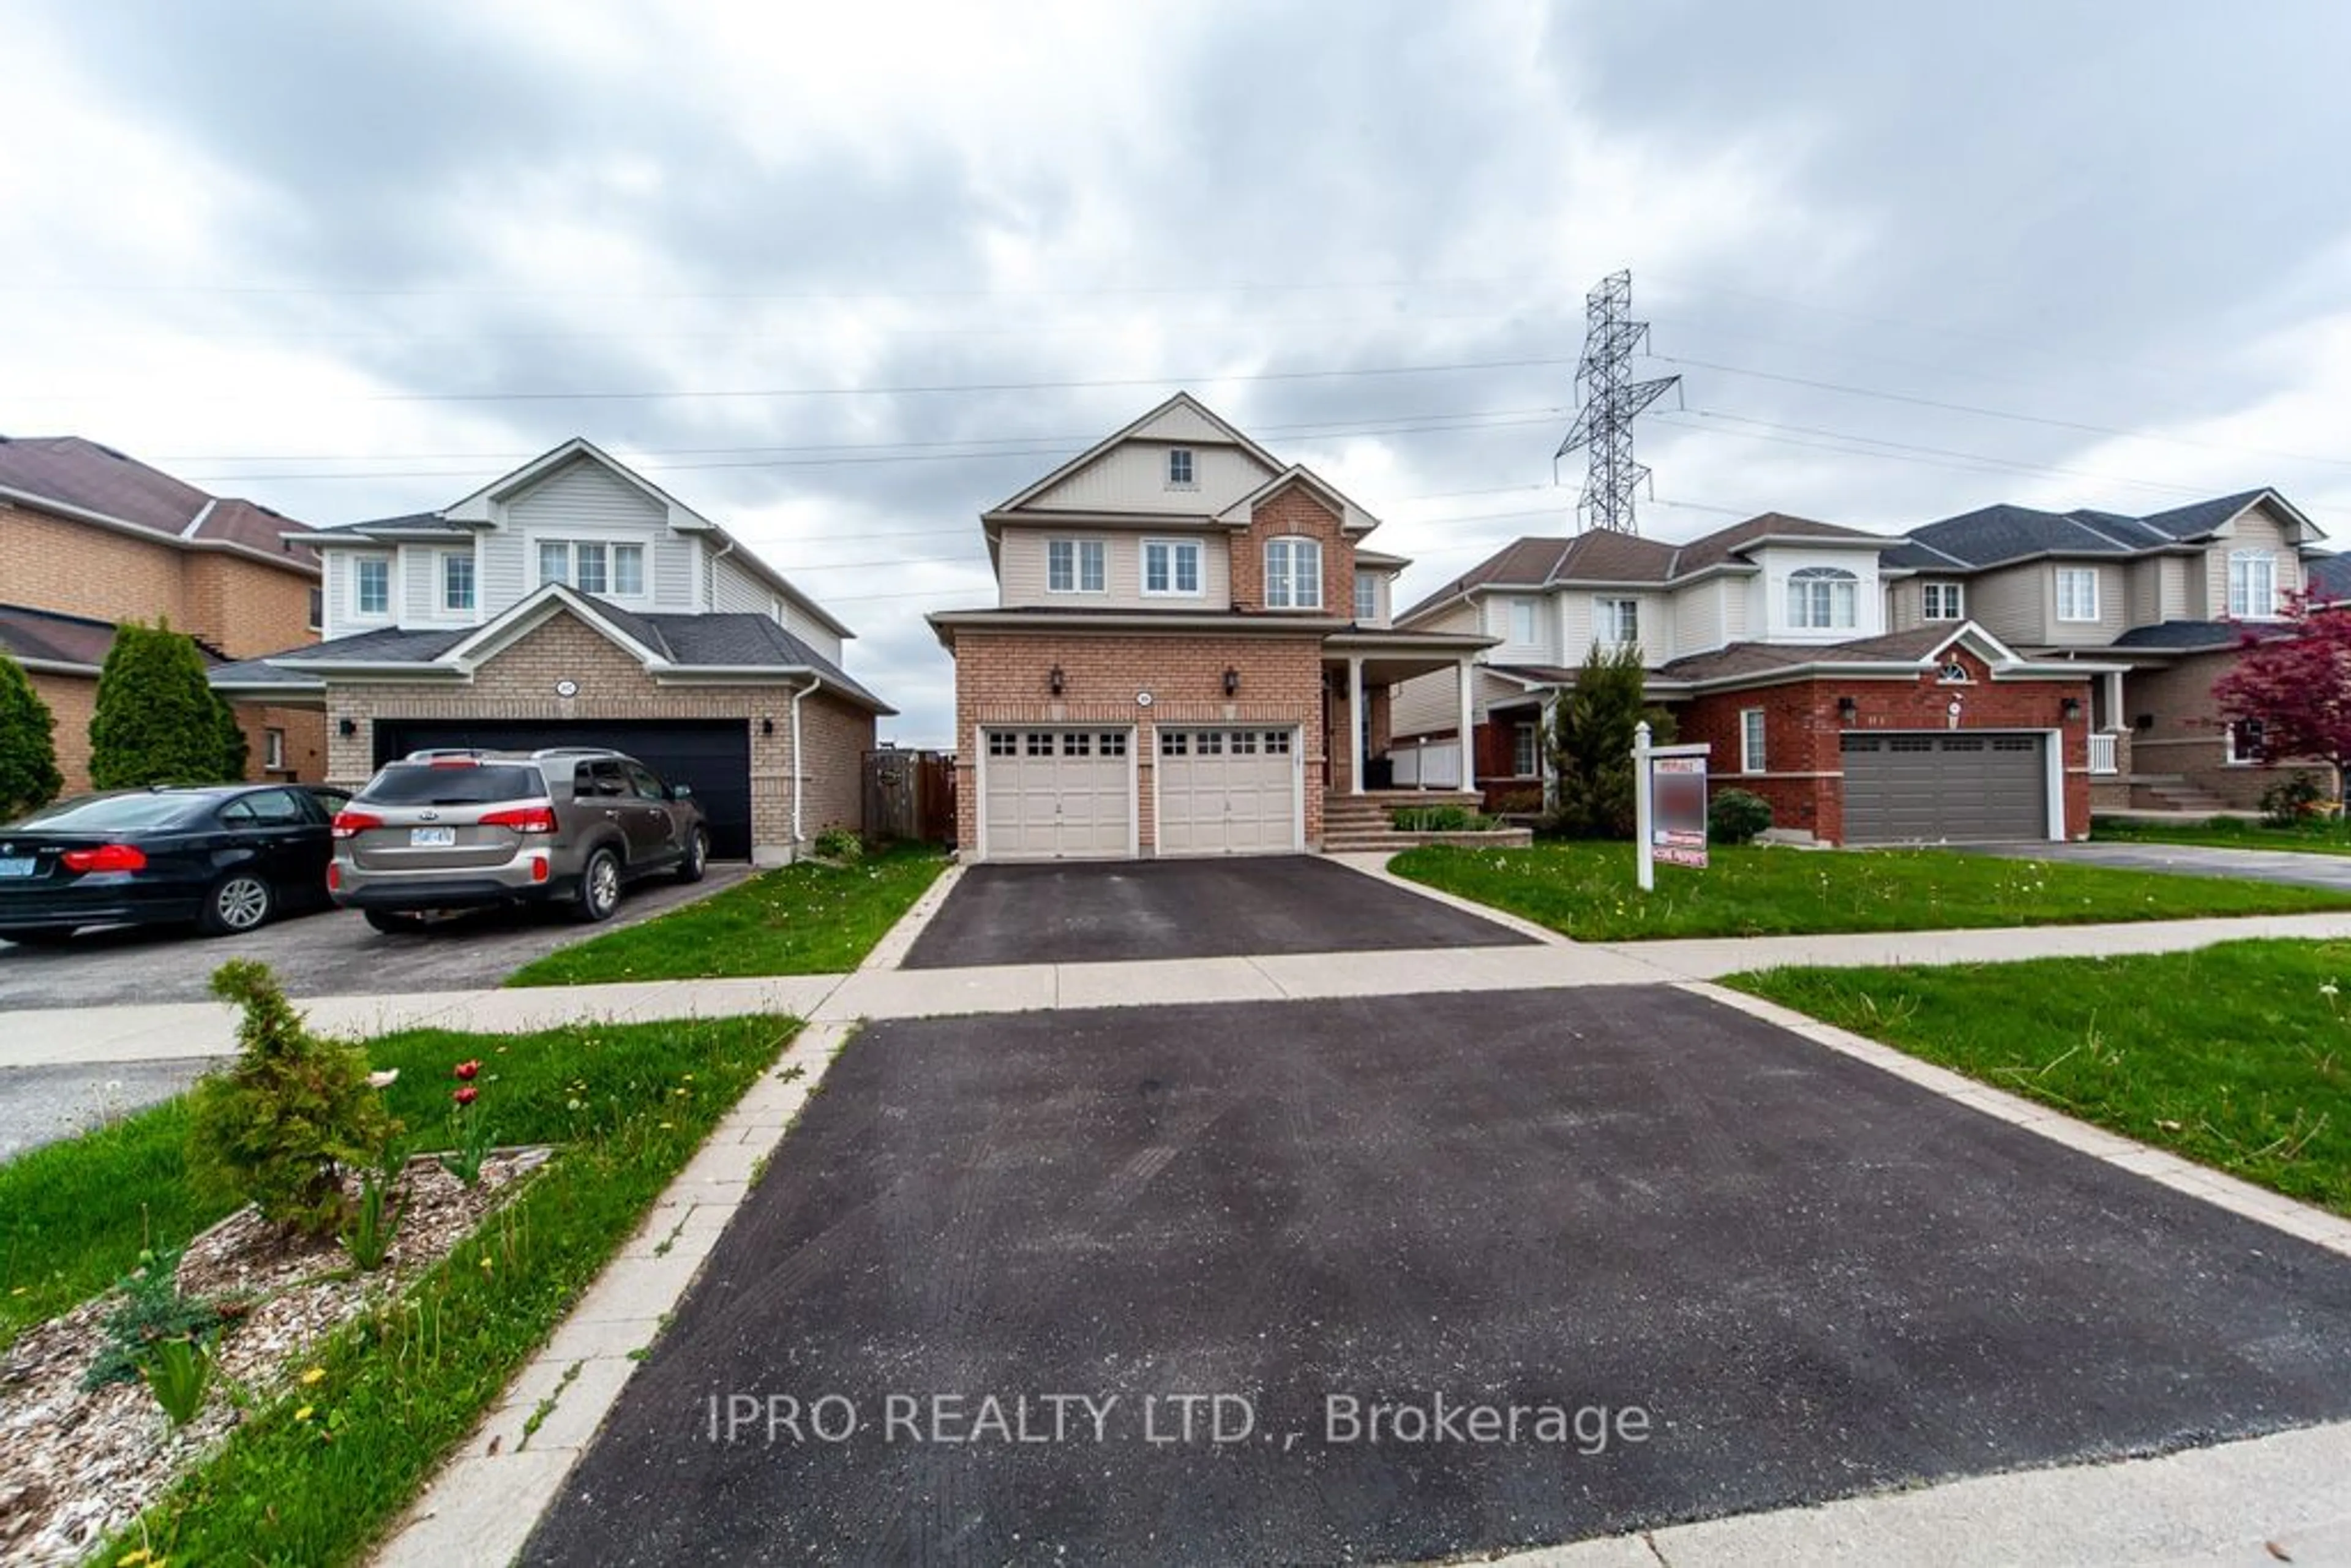 Frontside or backside of a home for 1896 Birchview Dr, Oshawa Ontario L1K 3B9